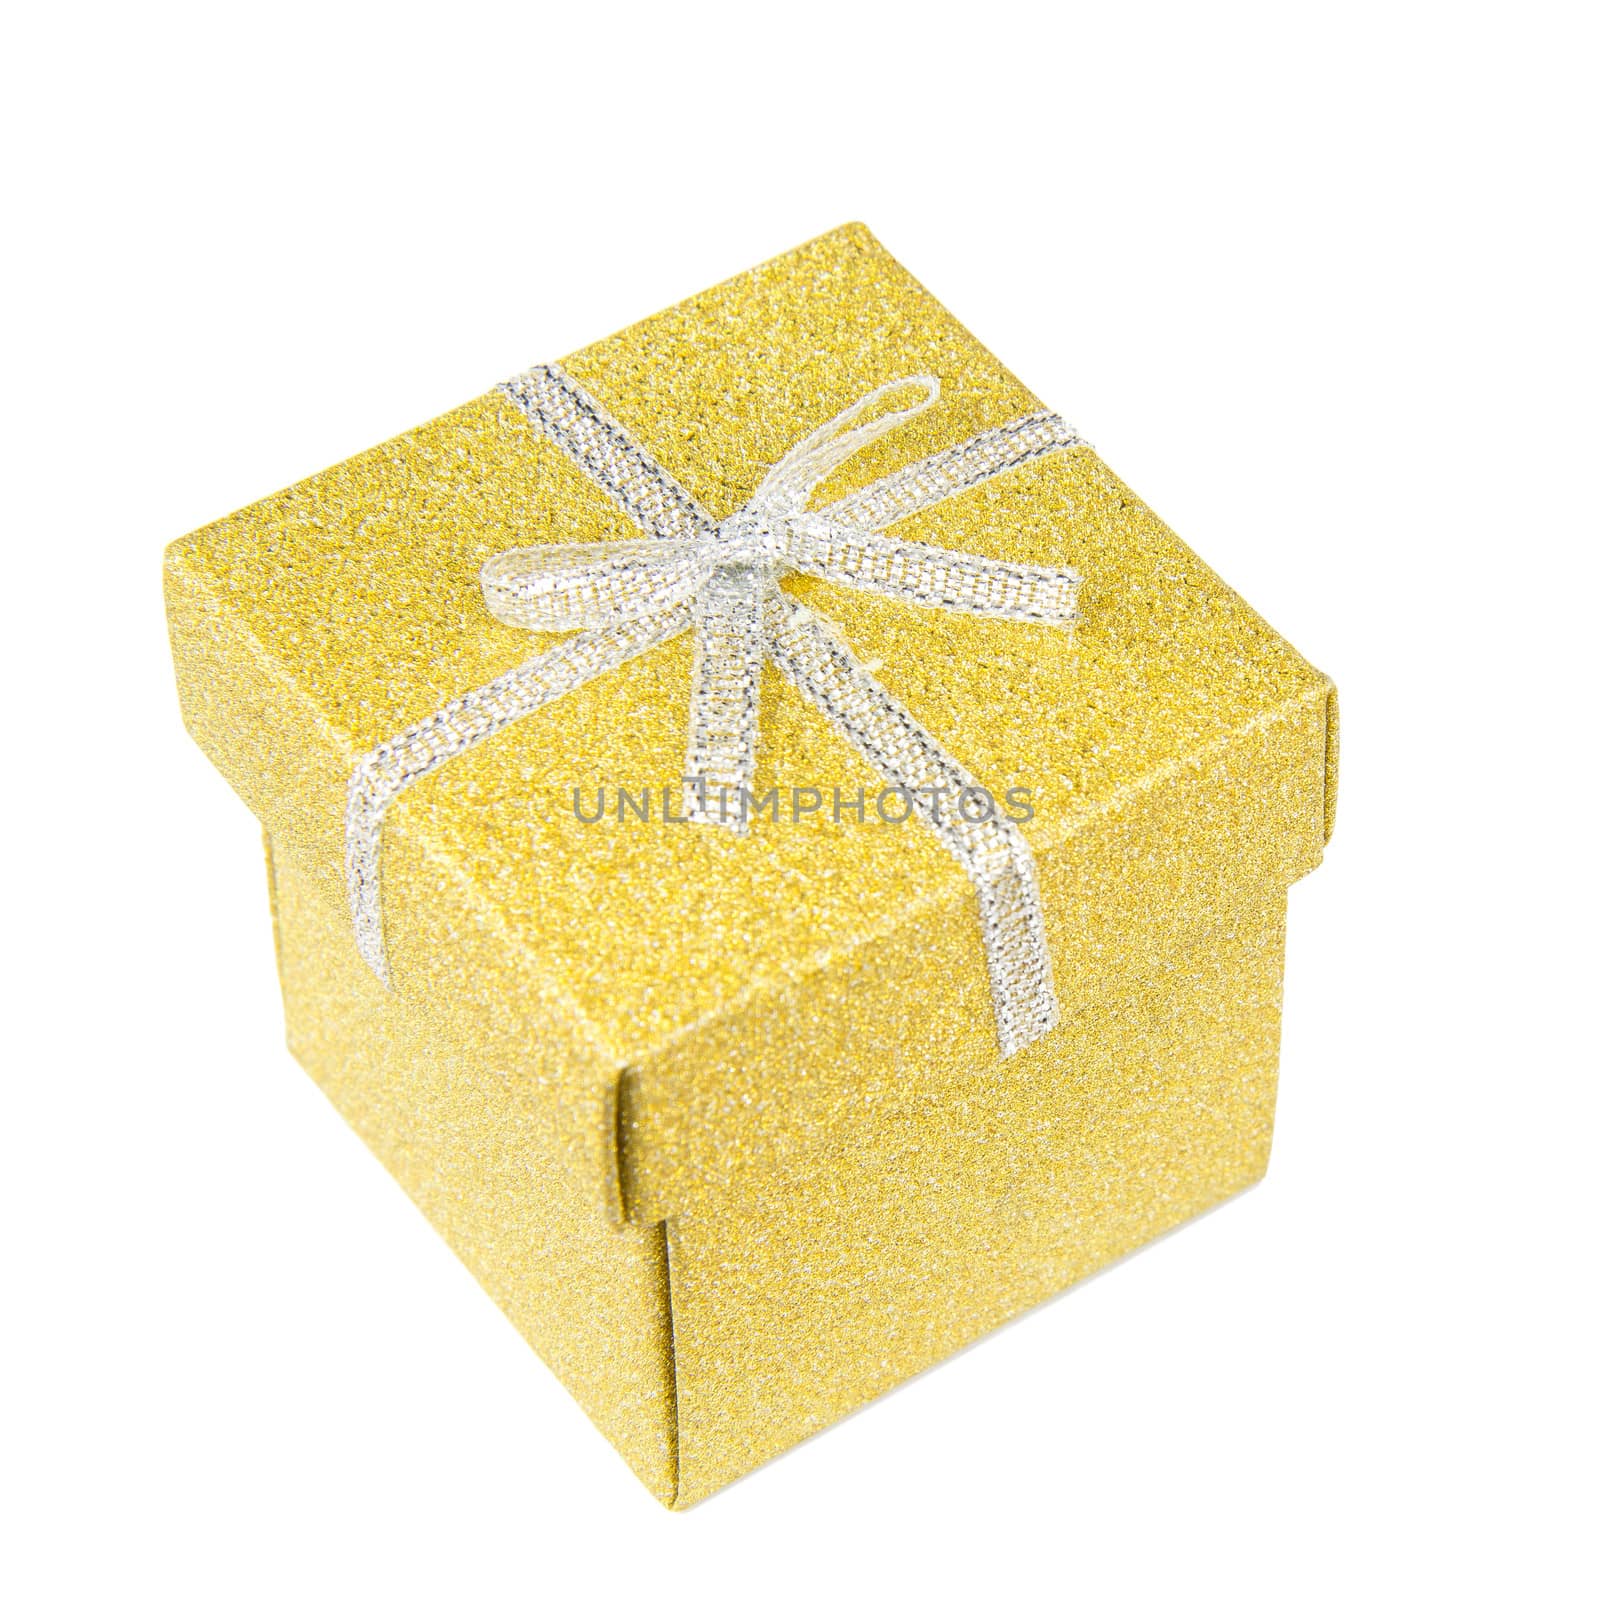 Golden, square, shiny gift box with silver ribbon on white background.